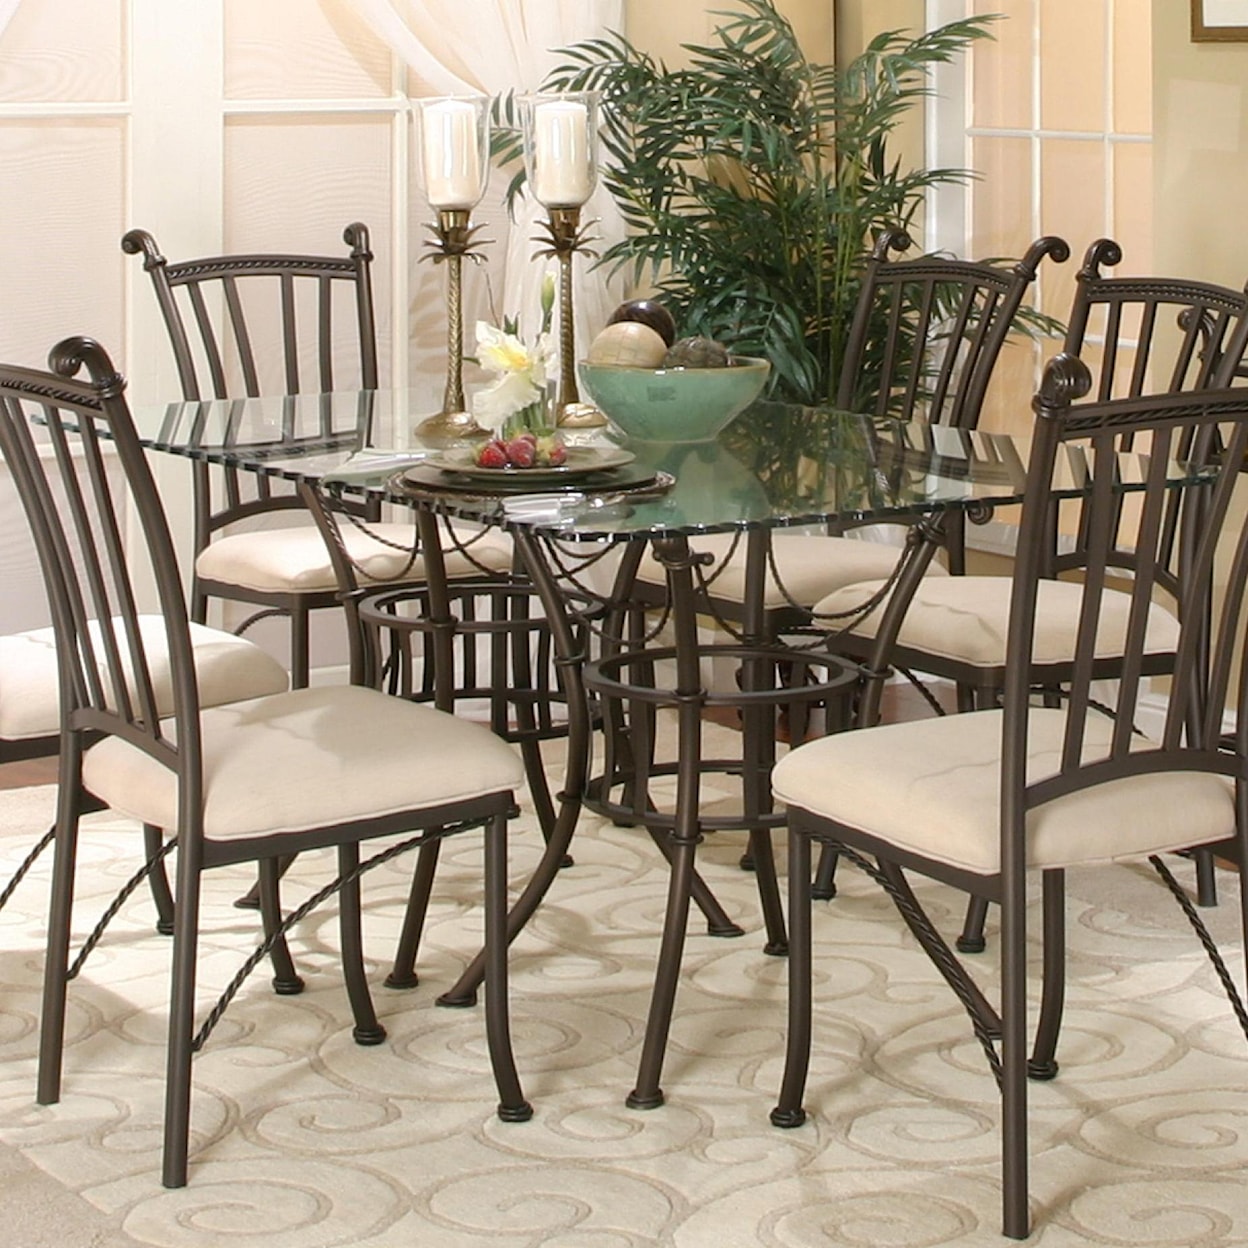 Cramco, Inc Denali 5 Piece Rectangular Glass Table with Chairs